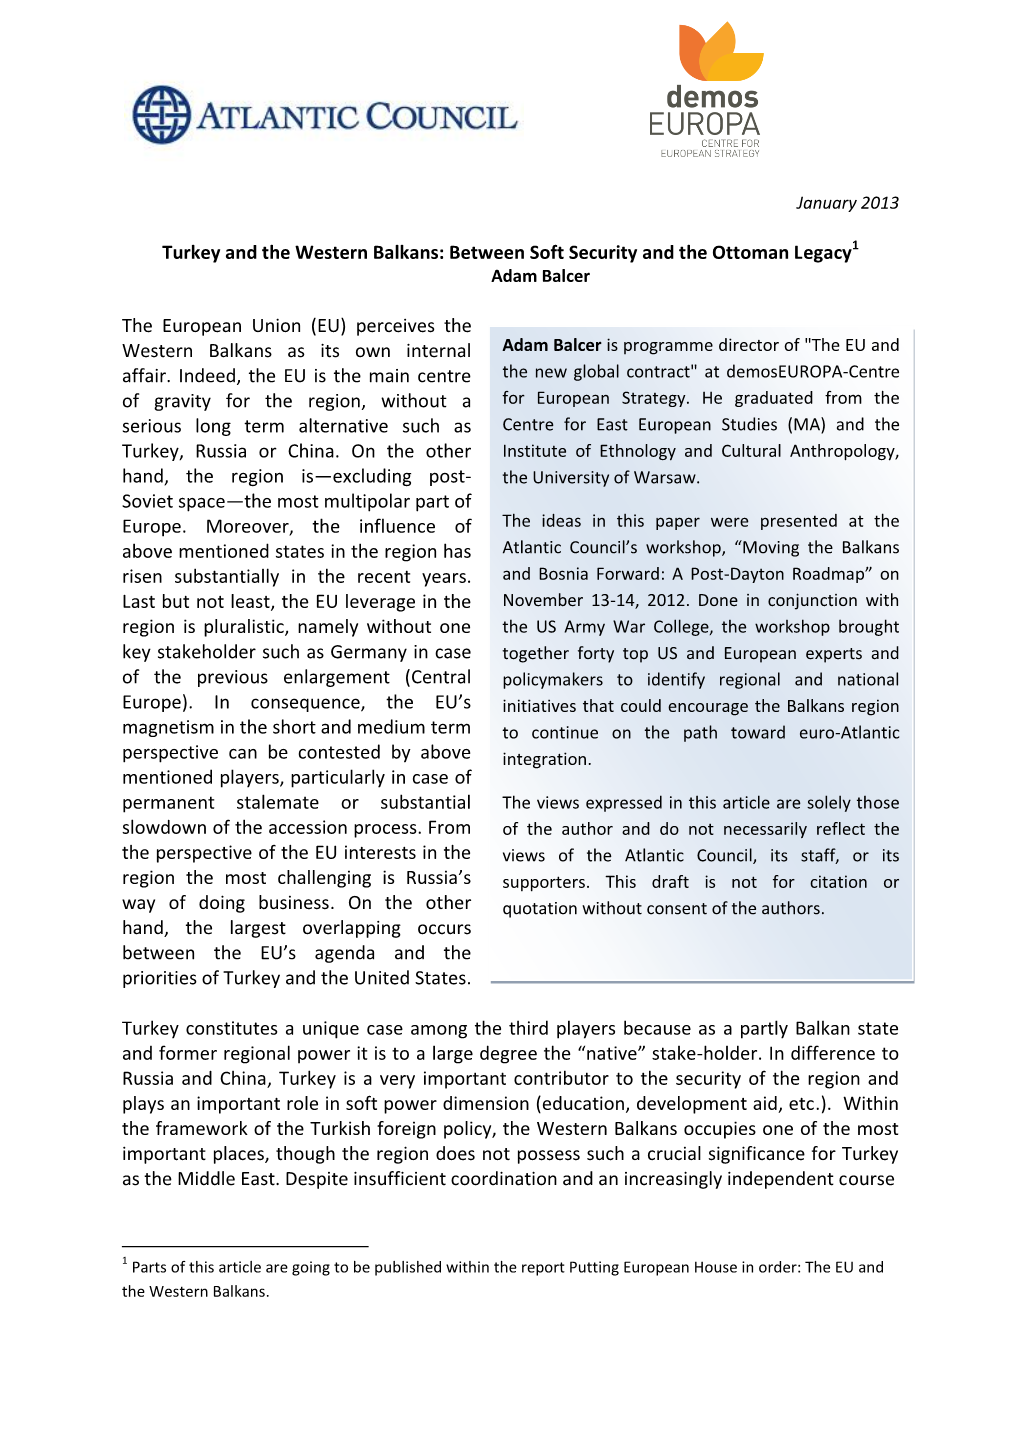 Turkey and the Western Balkans: Between Soft Security and the Ottoman Legacy1 Adam Balcer